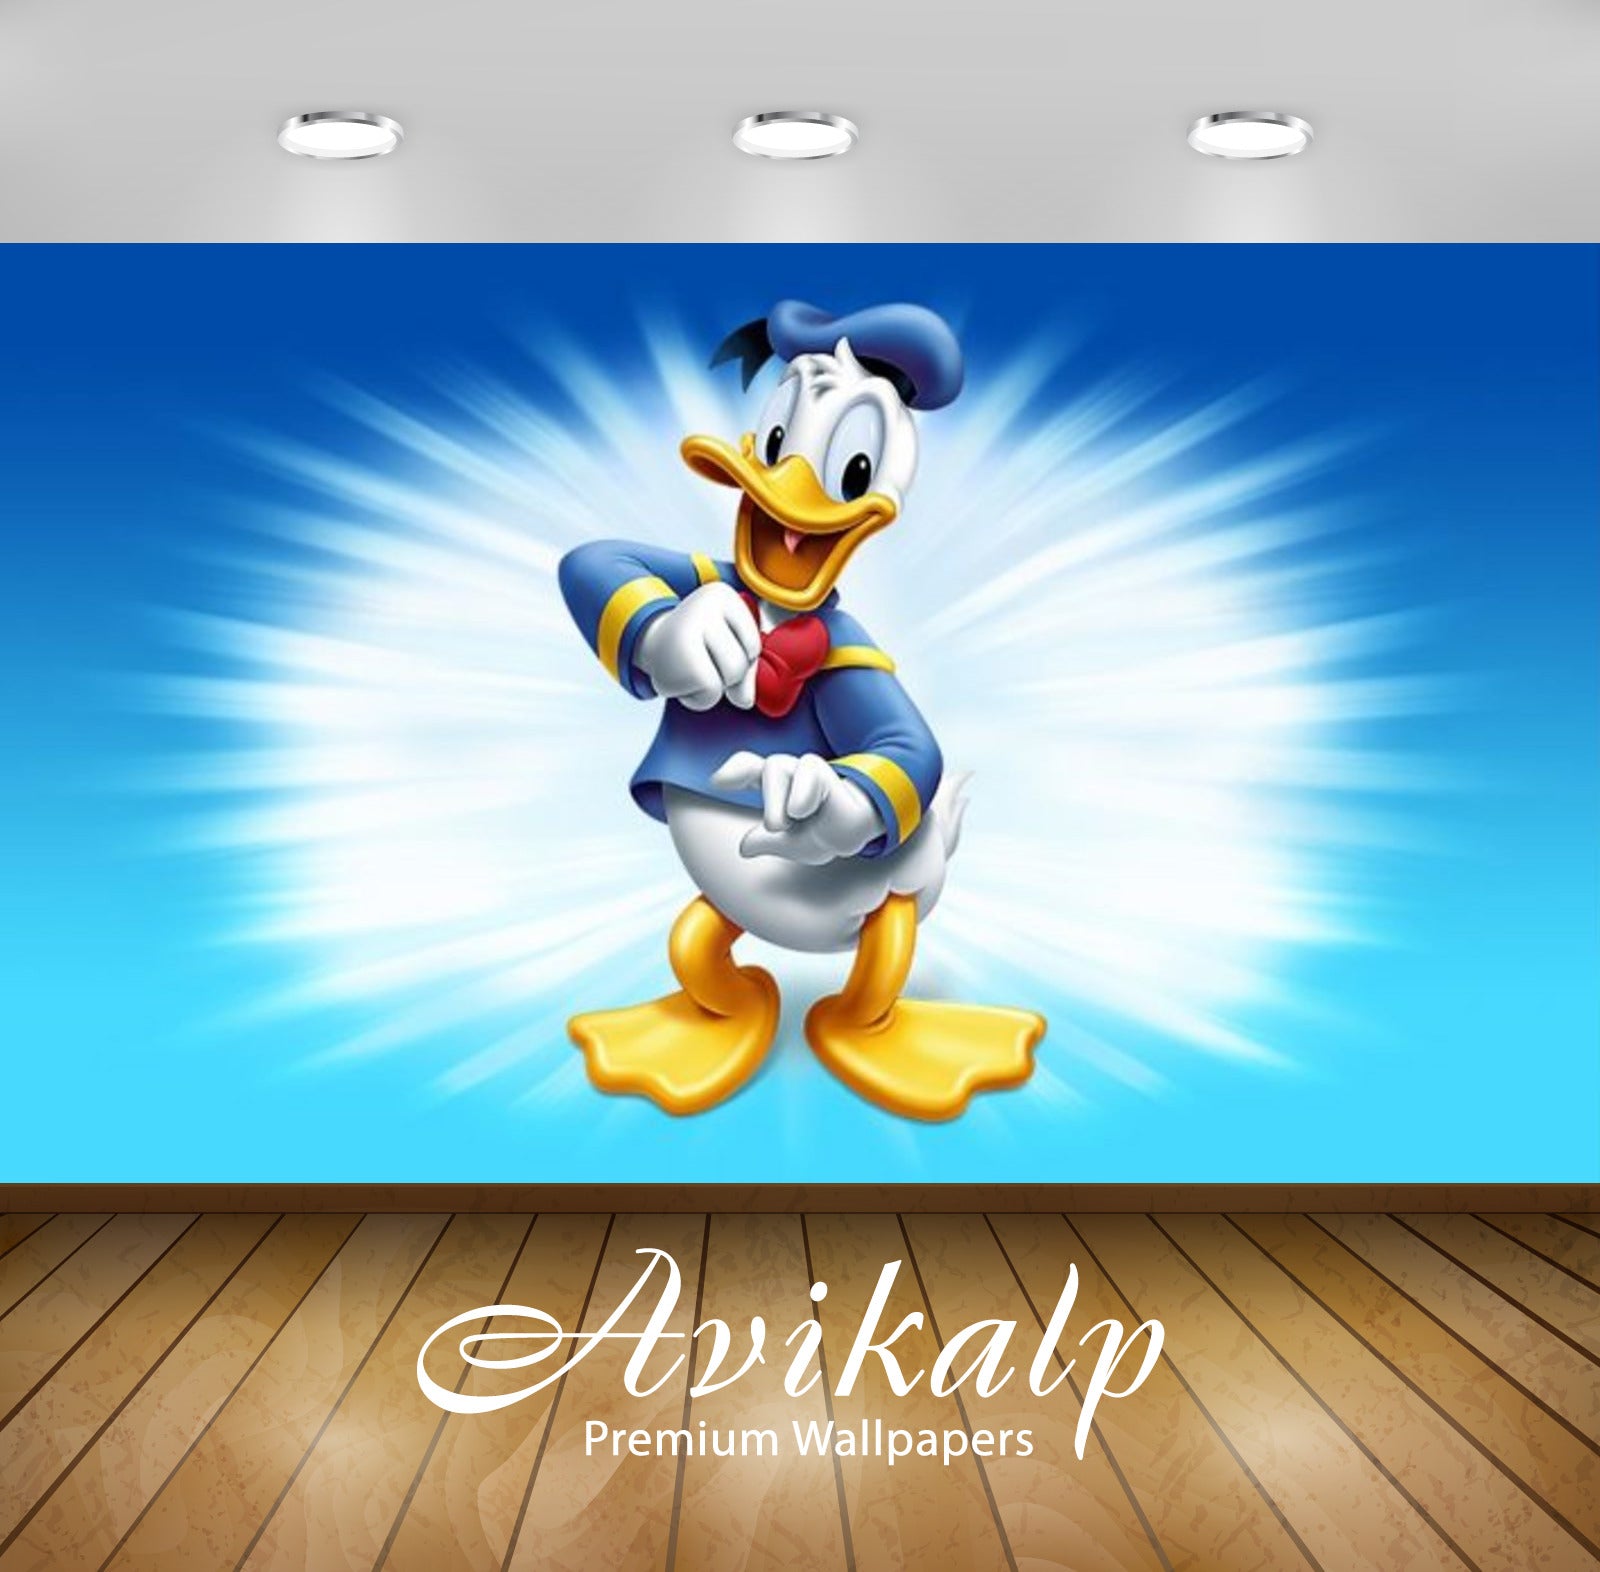 Avikalp Exclusive Awi2153 The Adventures Of Donald Duck Disney  Full HD Wallpapers for Living room,